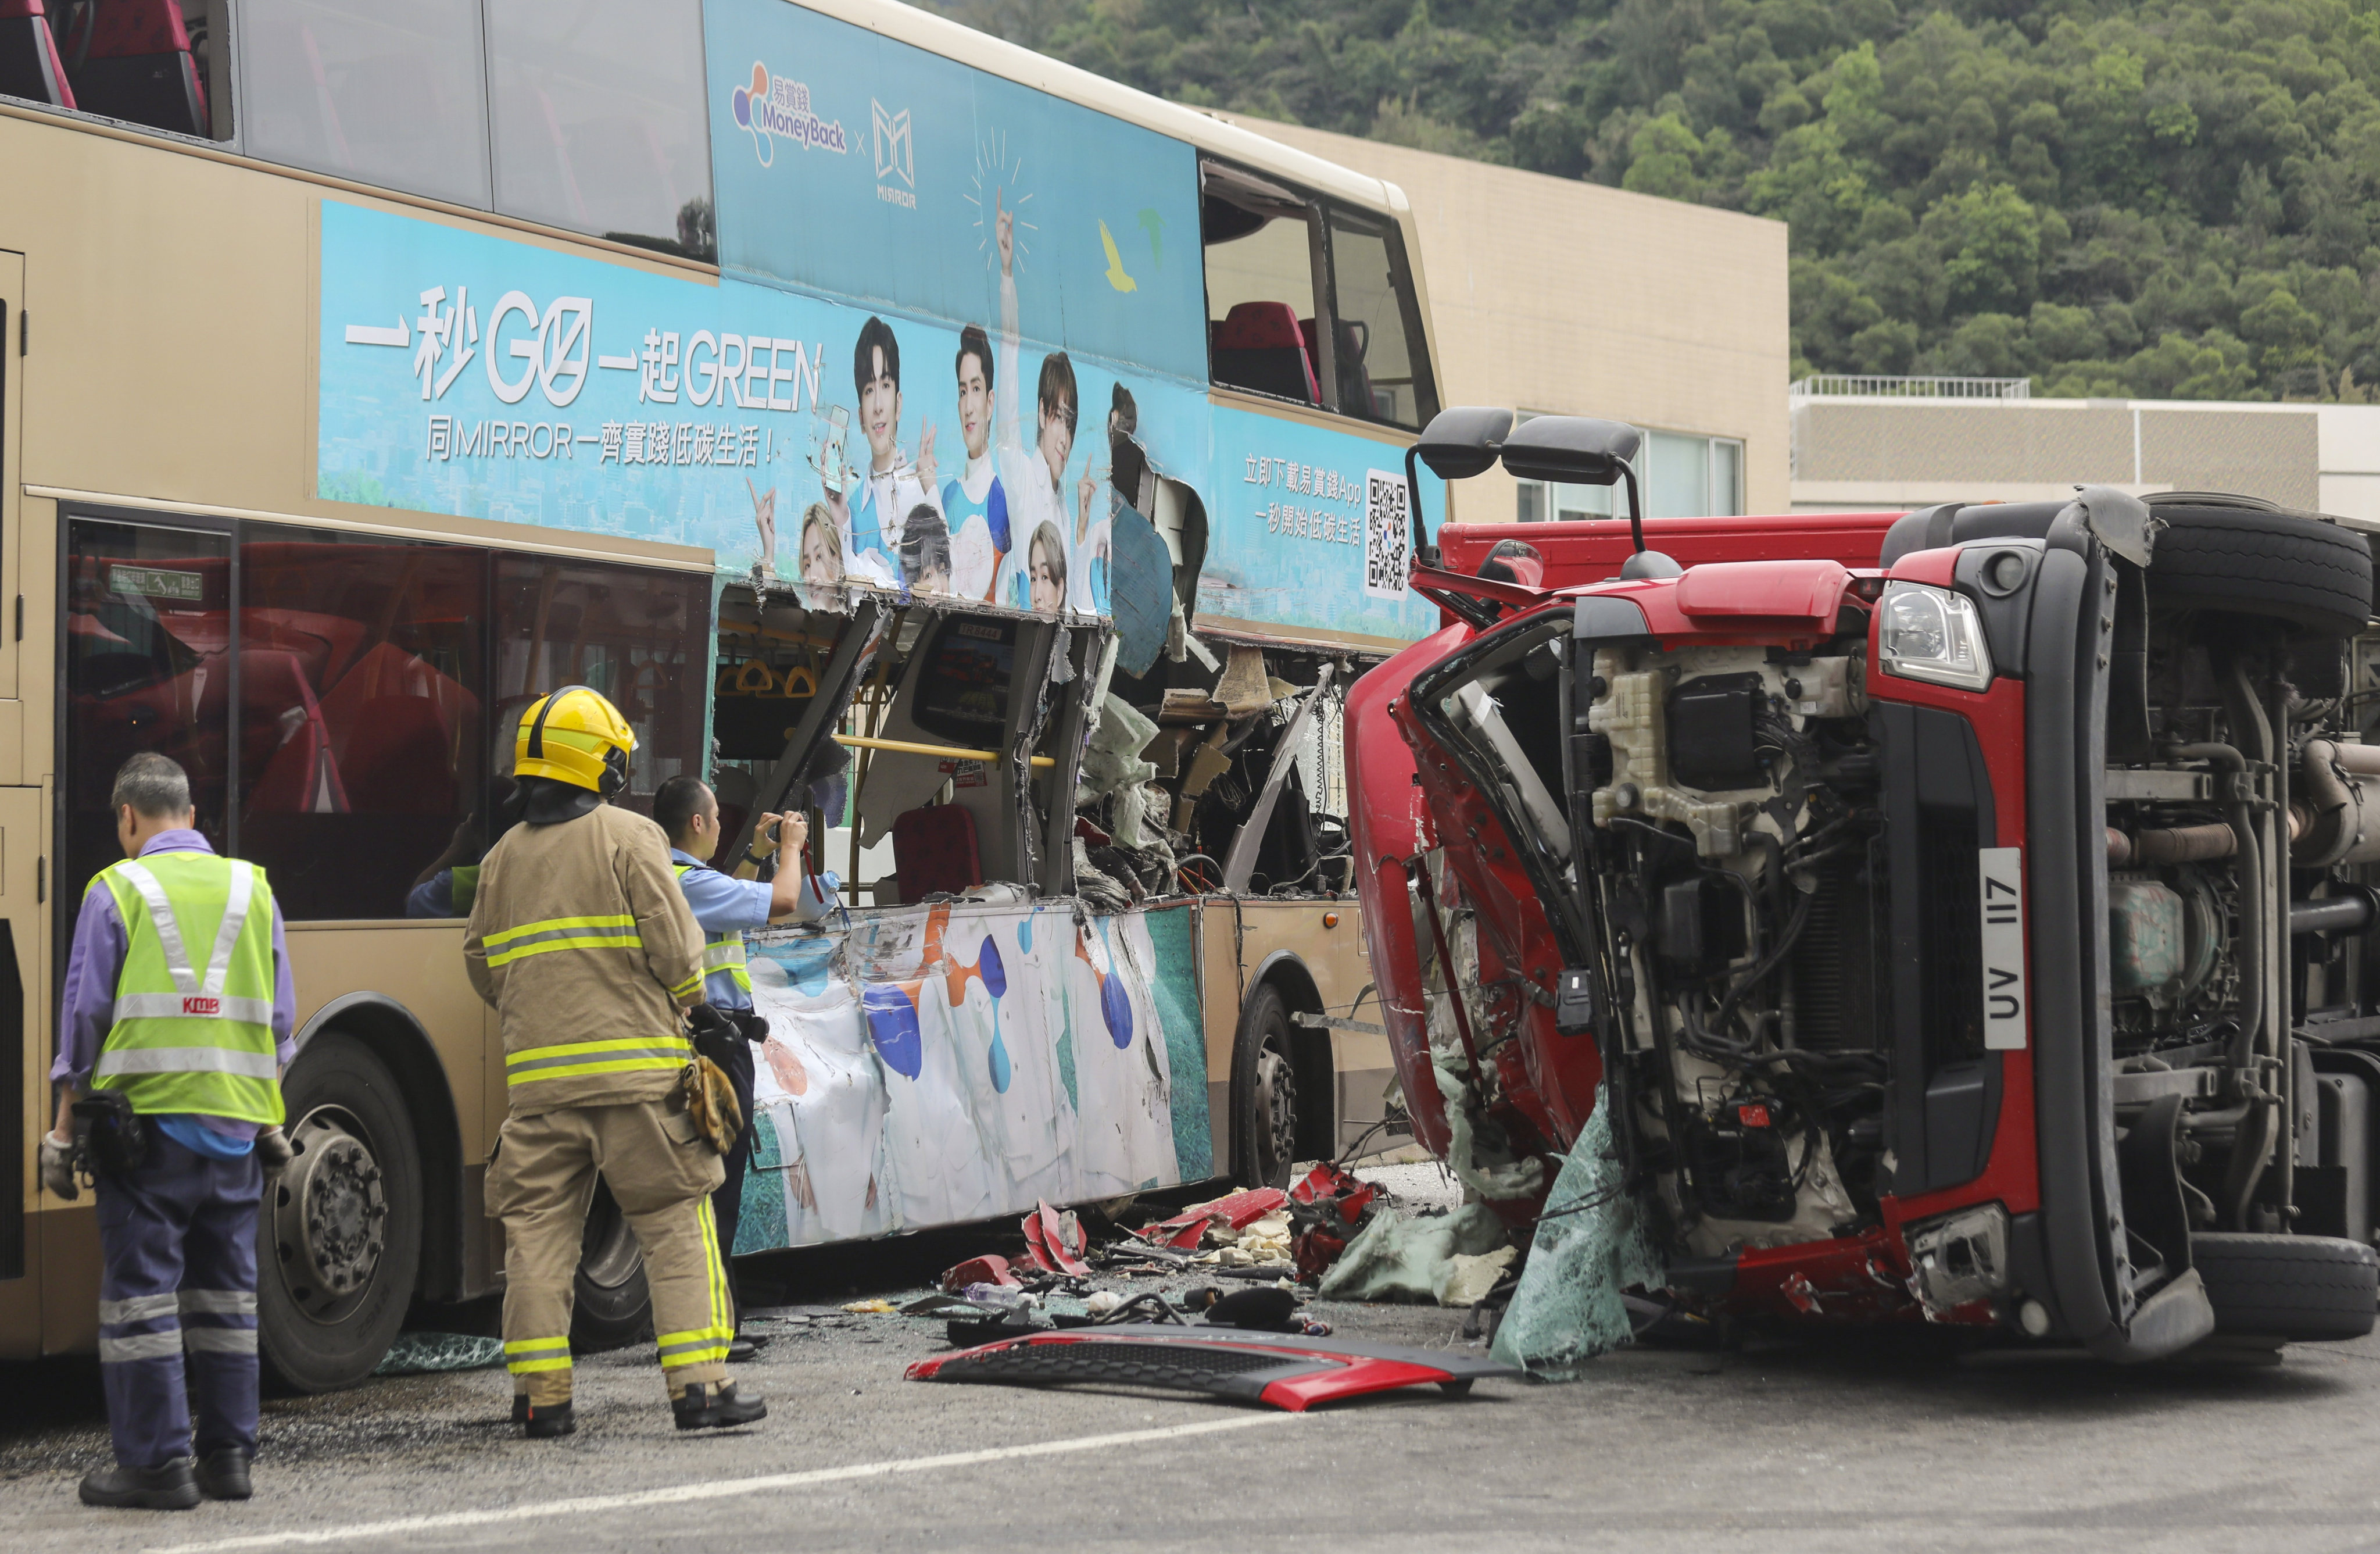 A truck collided with a bus and toppled onto its side in Tseung Kwan O Industrial Estate. Photo: Xiaomei Chen